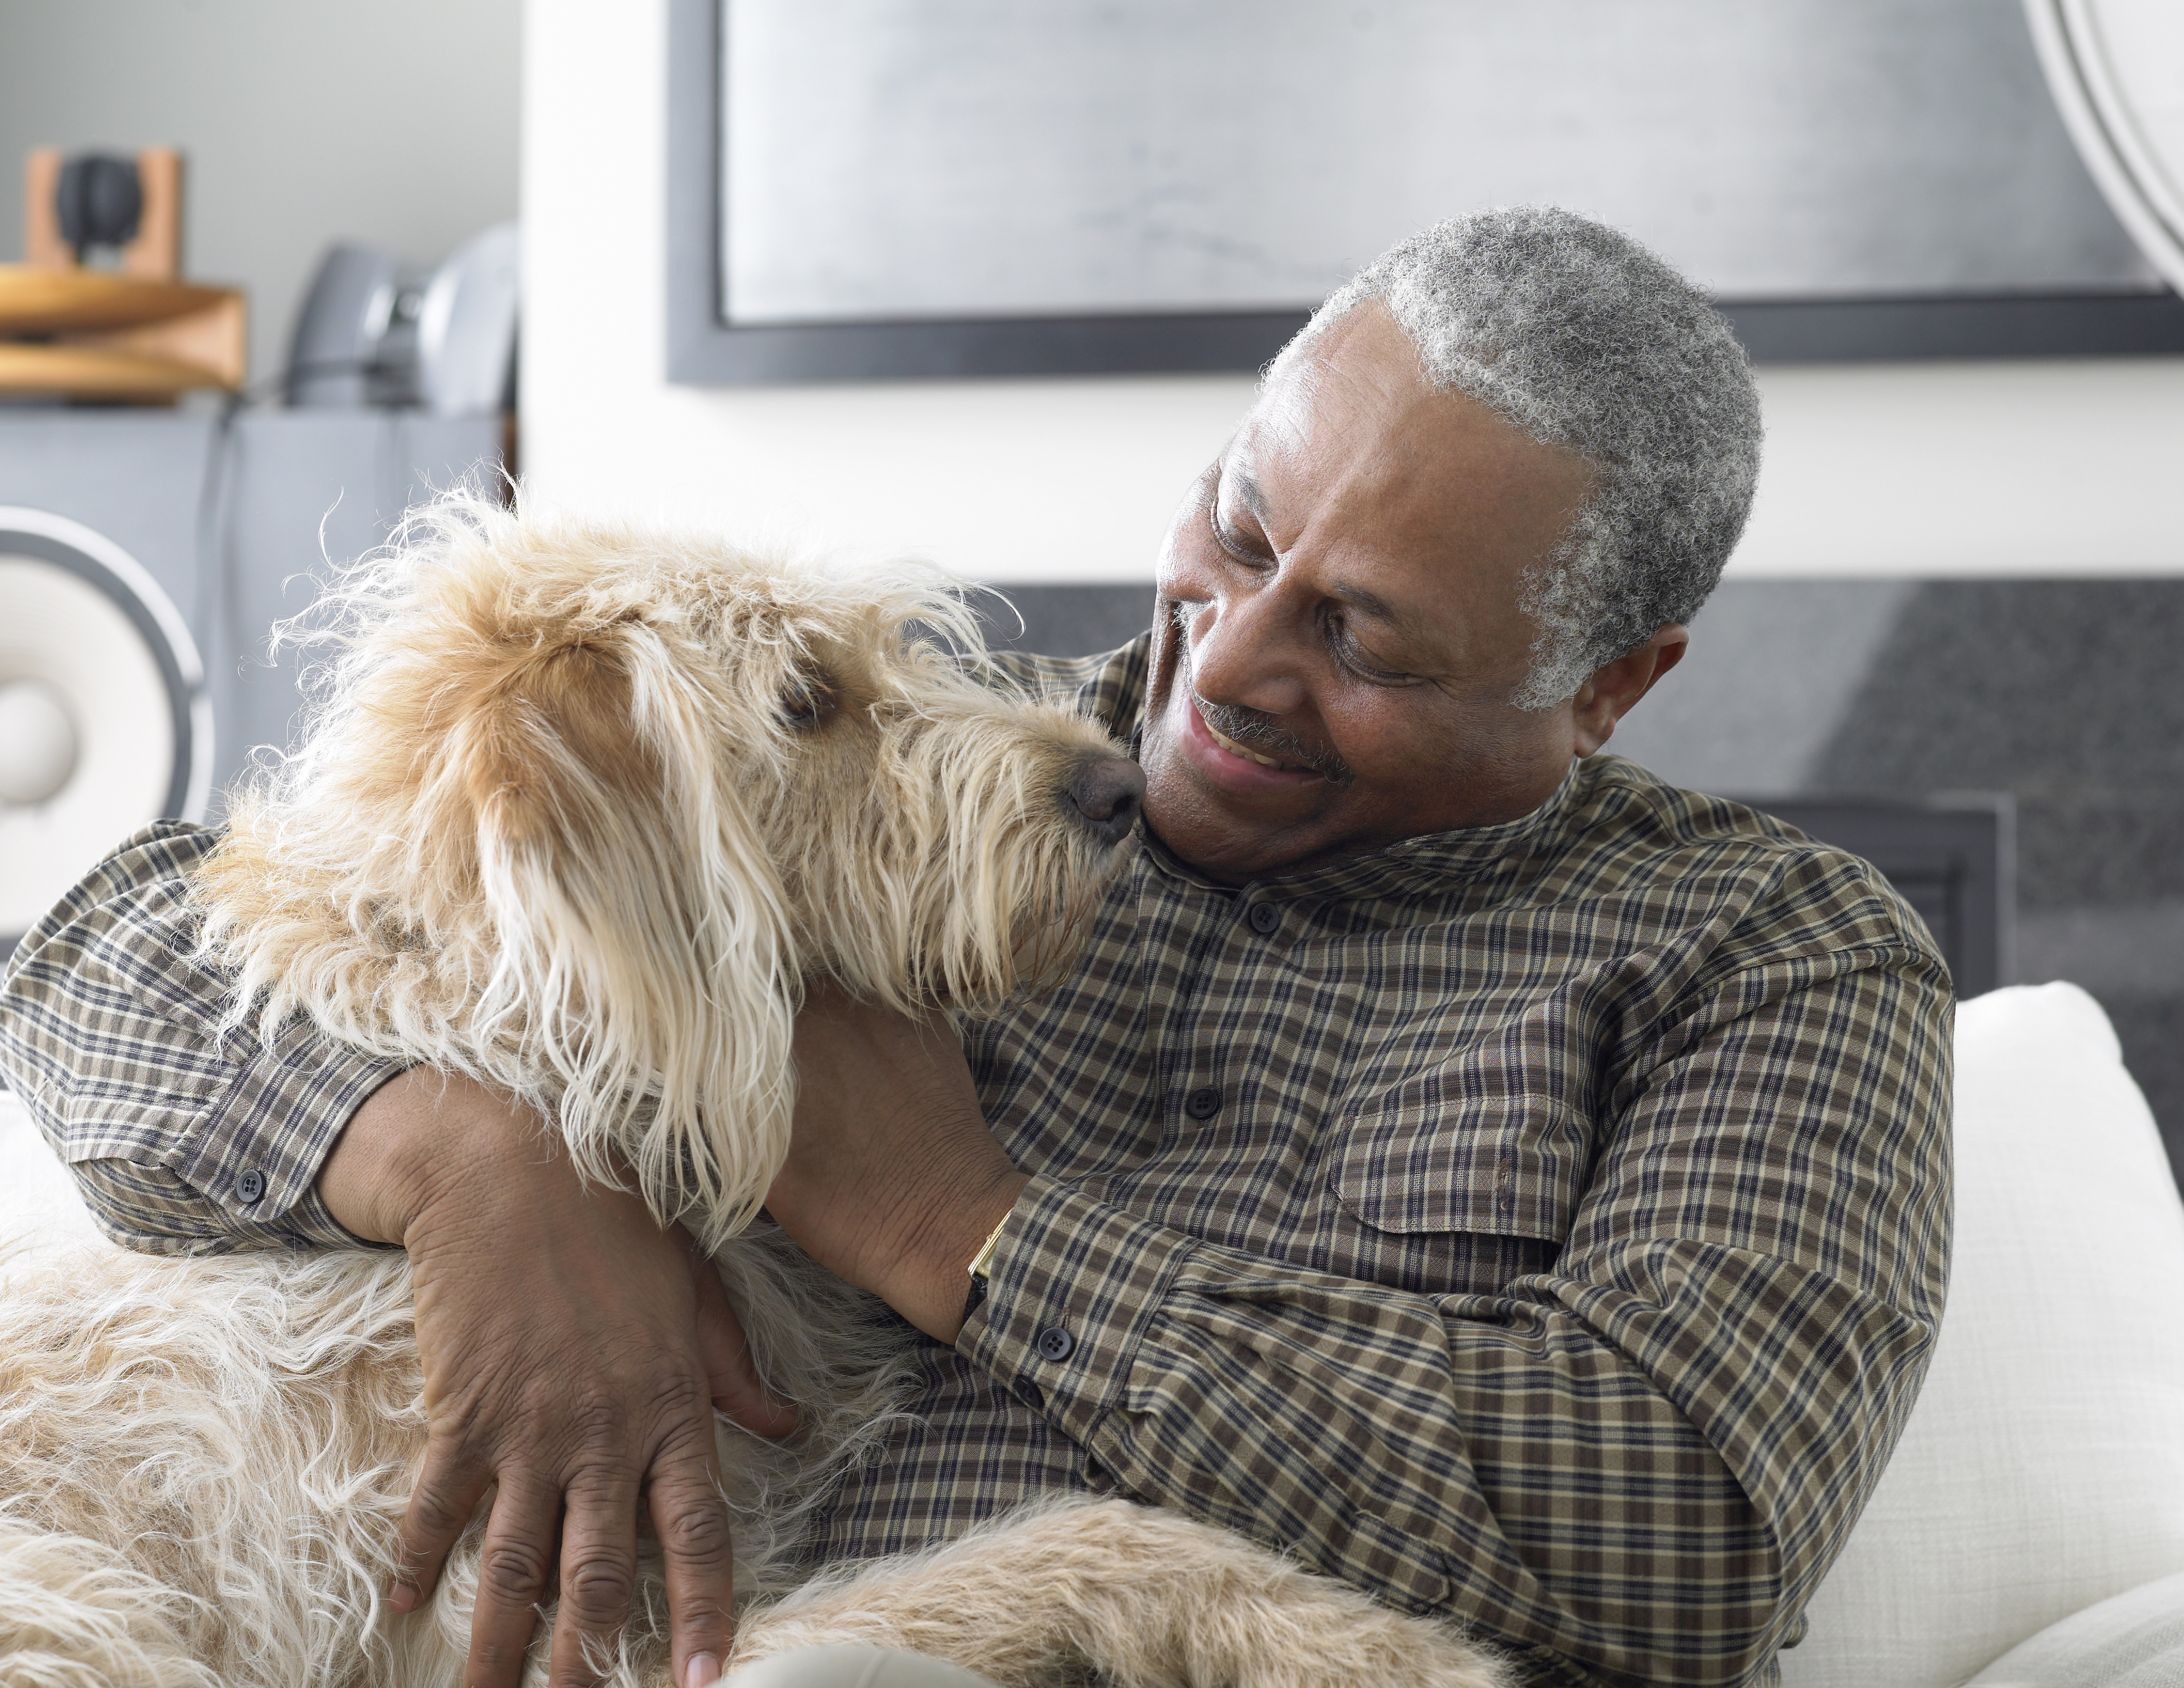 Man sitting on couch, smiling and embracing a fluffy dog, in a home setting